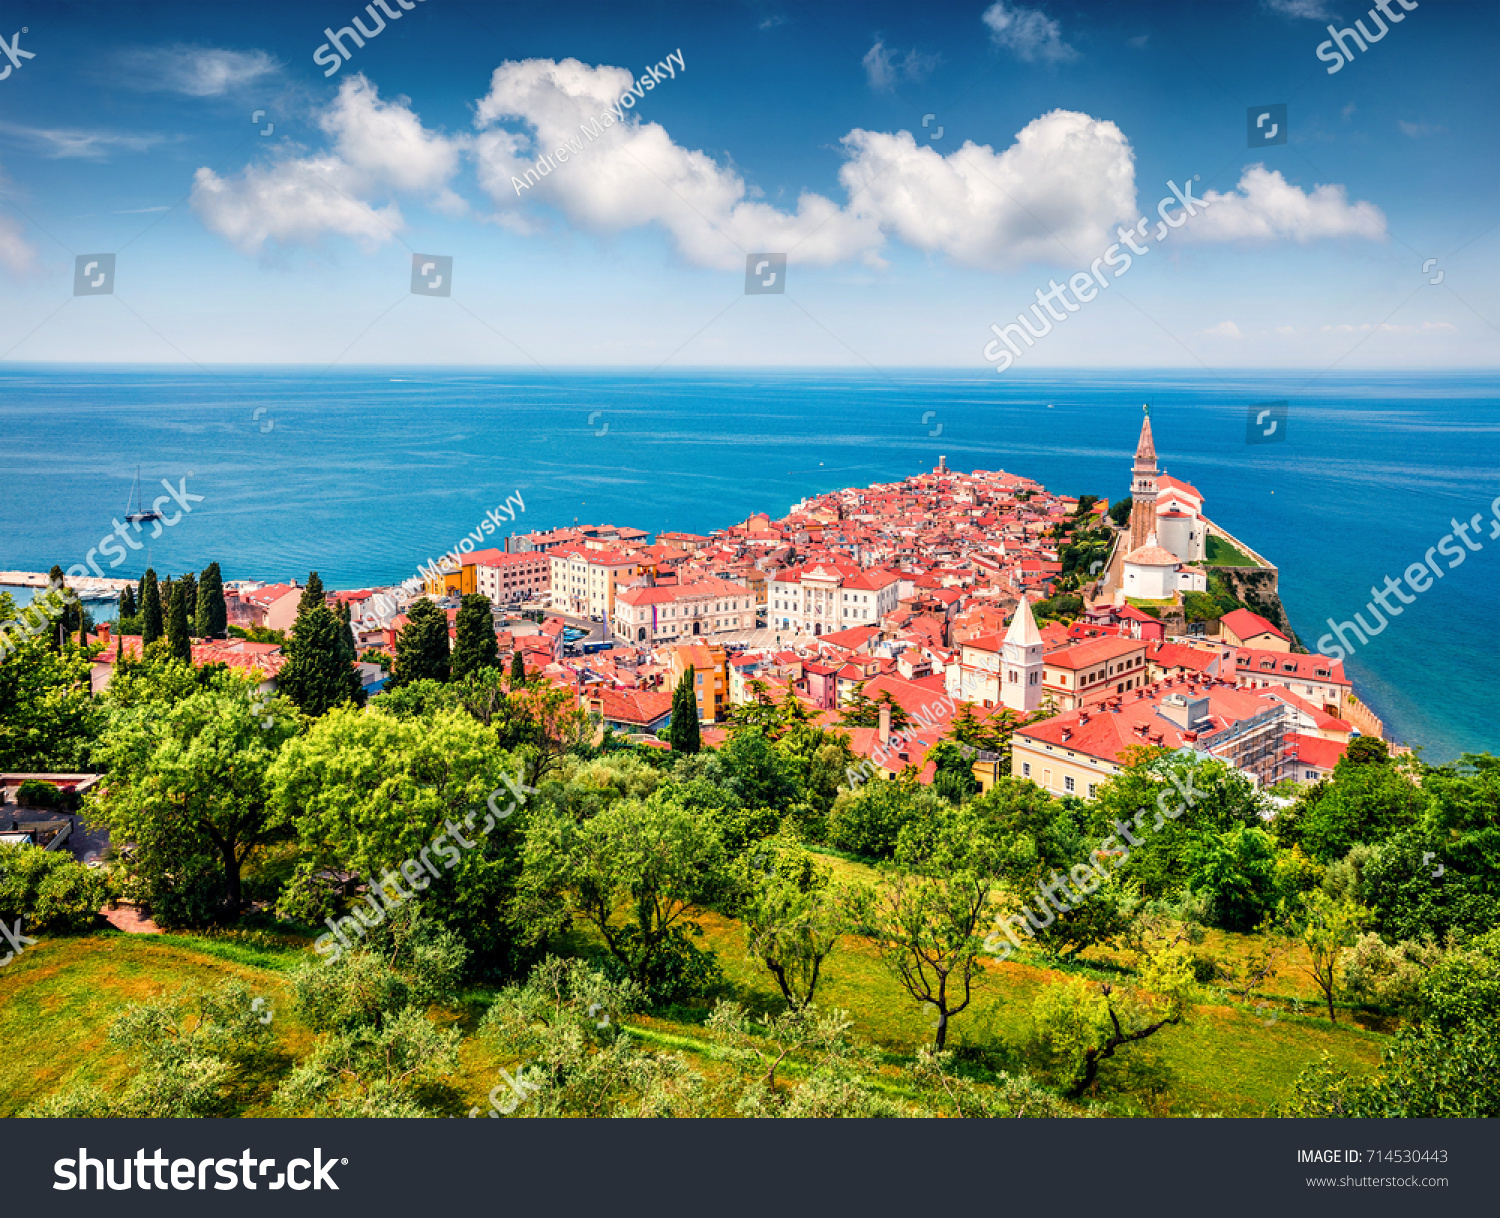 Aerial view of old town Piran. Splendid spring morning on Adriatic Sea. Beautiful cityscape of Slovenia, Europe. Traveling concept background. Magnificent Mediterranean landscape. #714530443